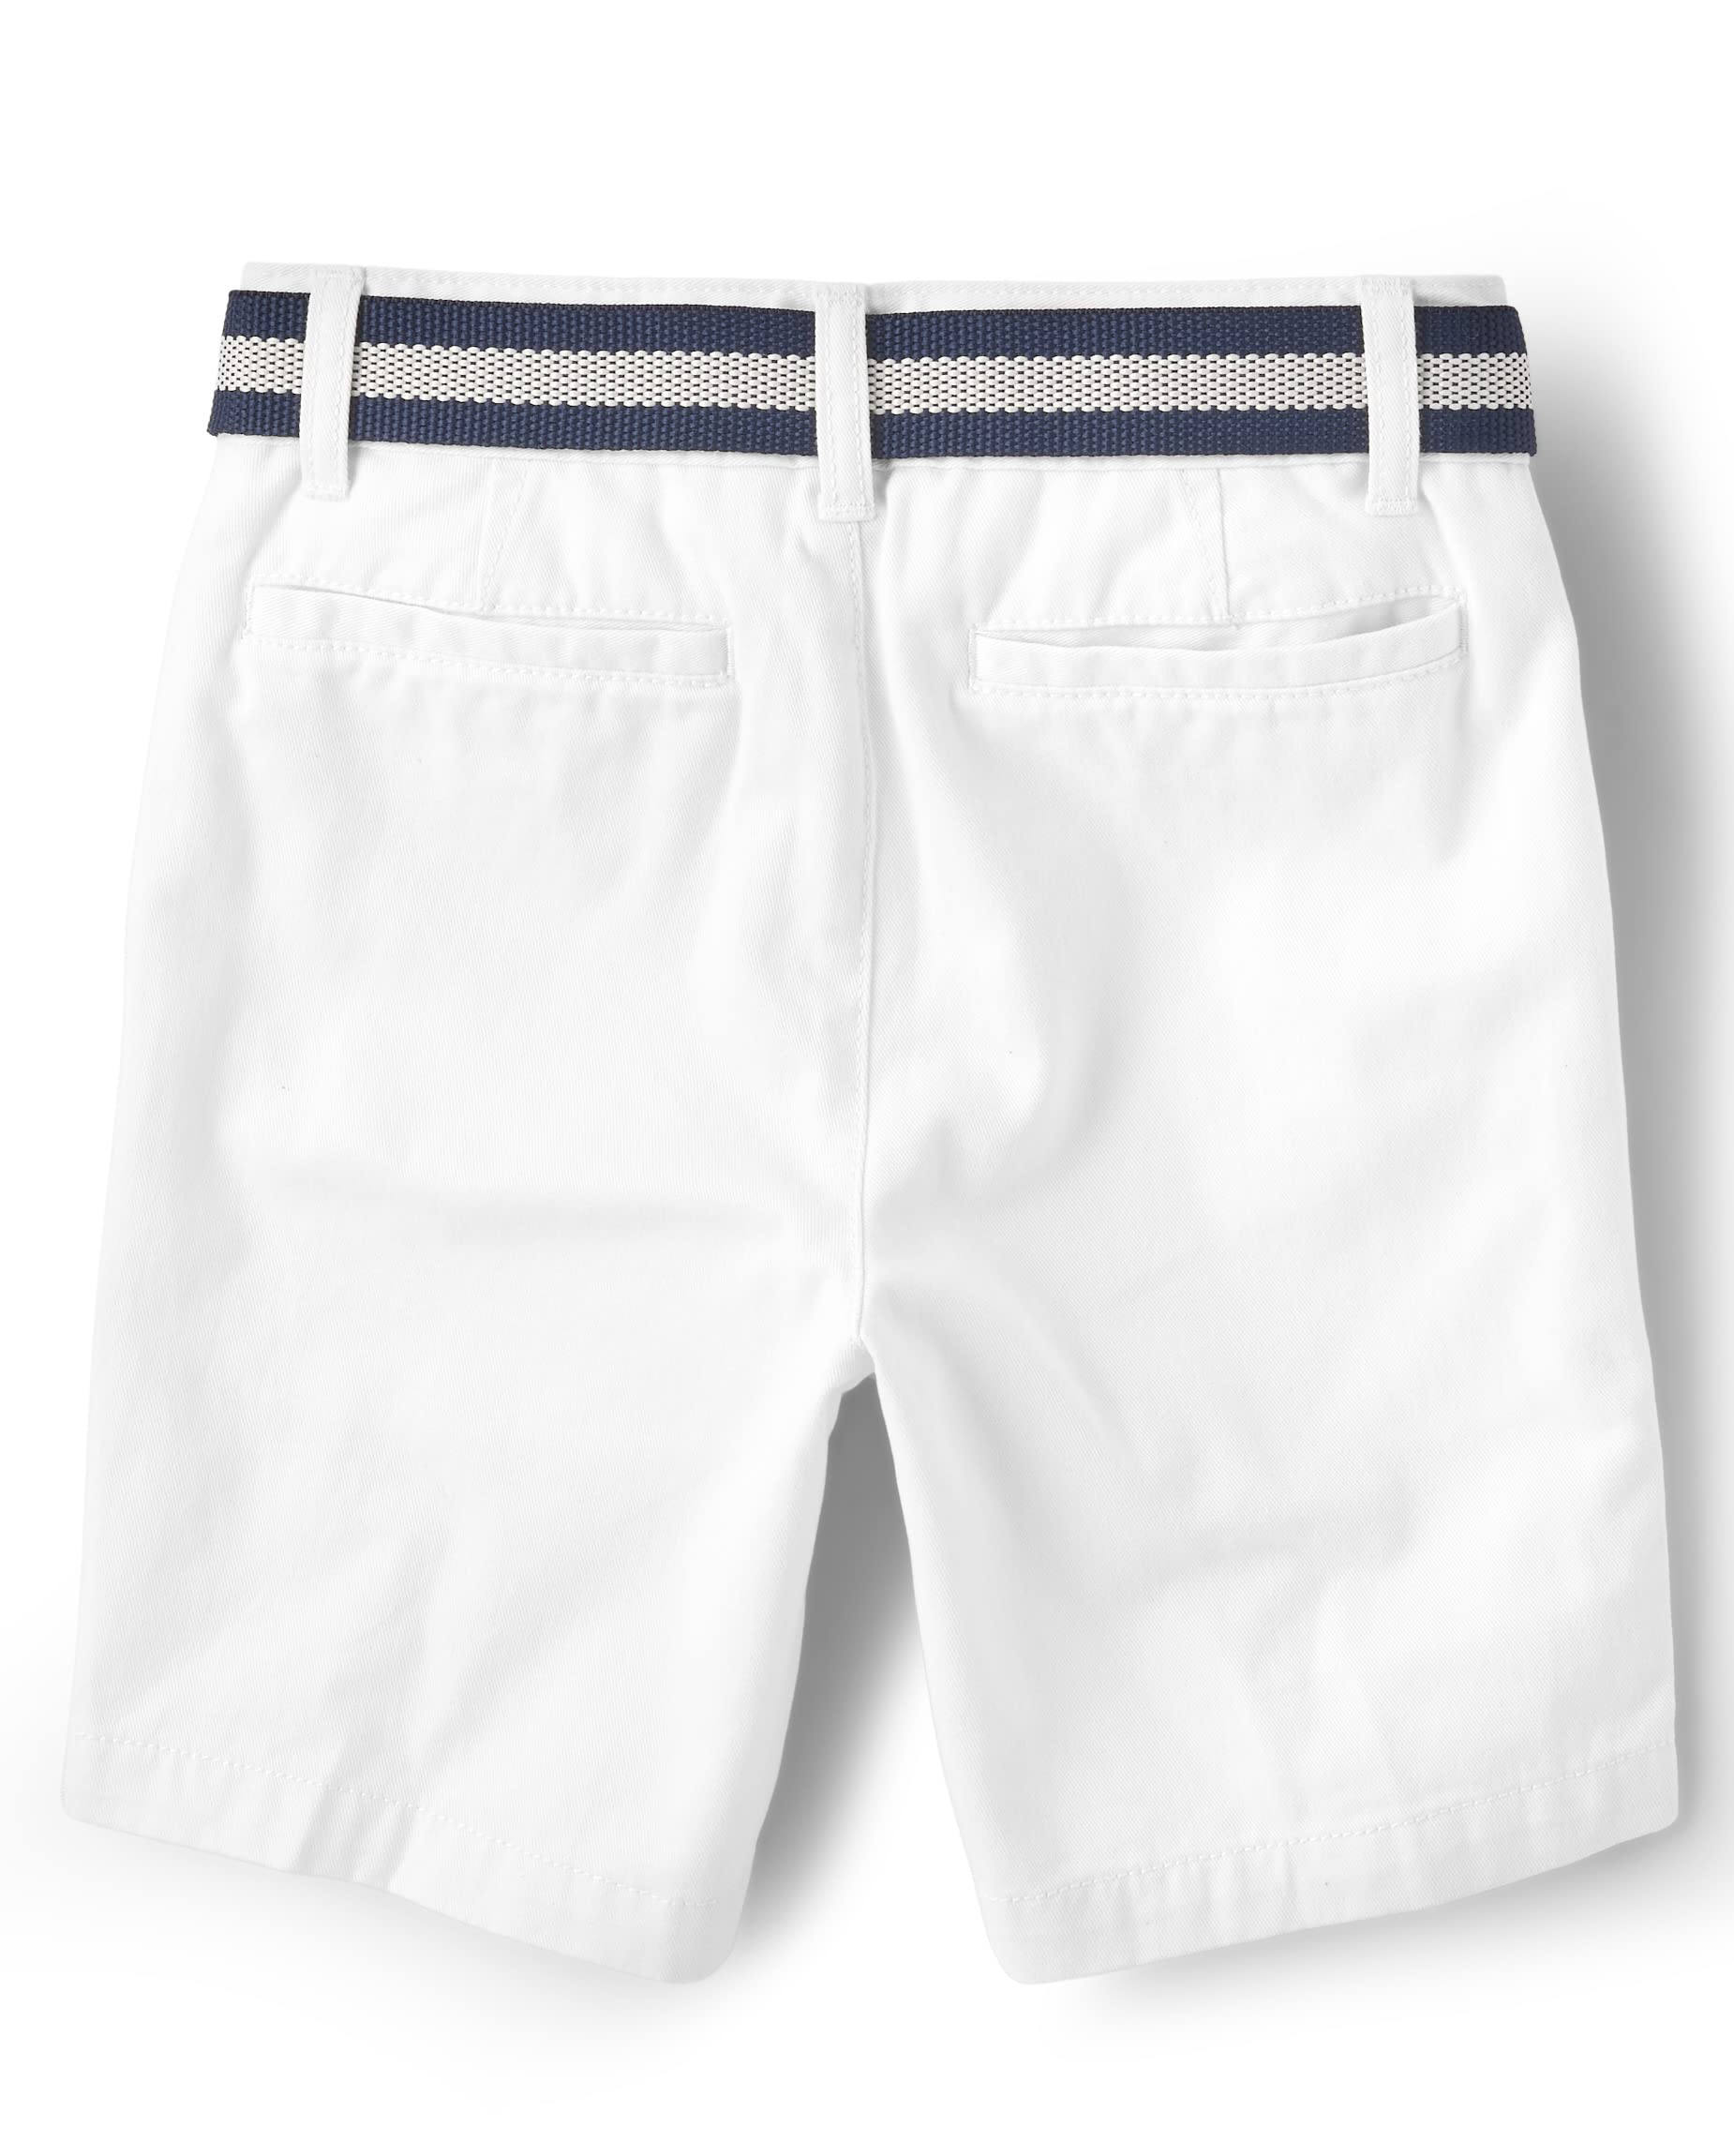 The Children's Place Boys' Belted Chino Shorts